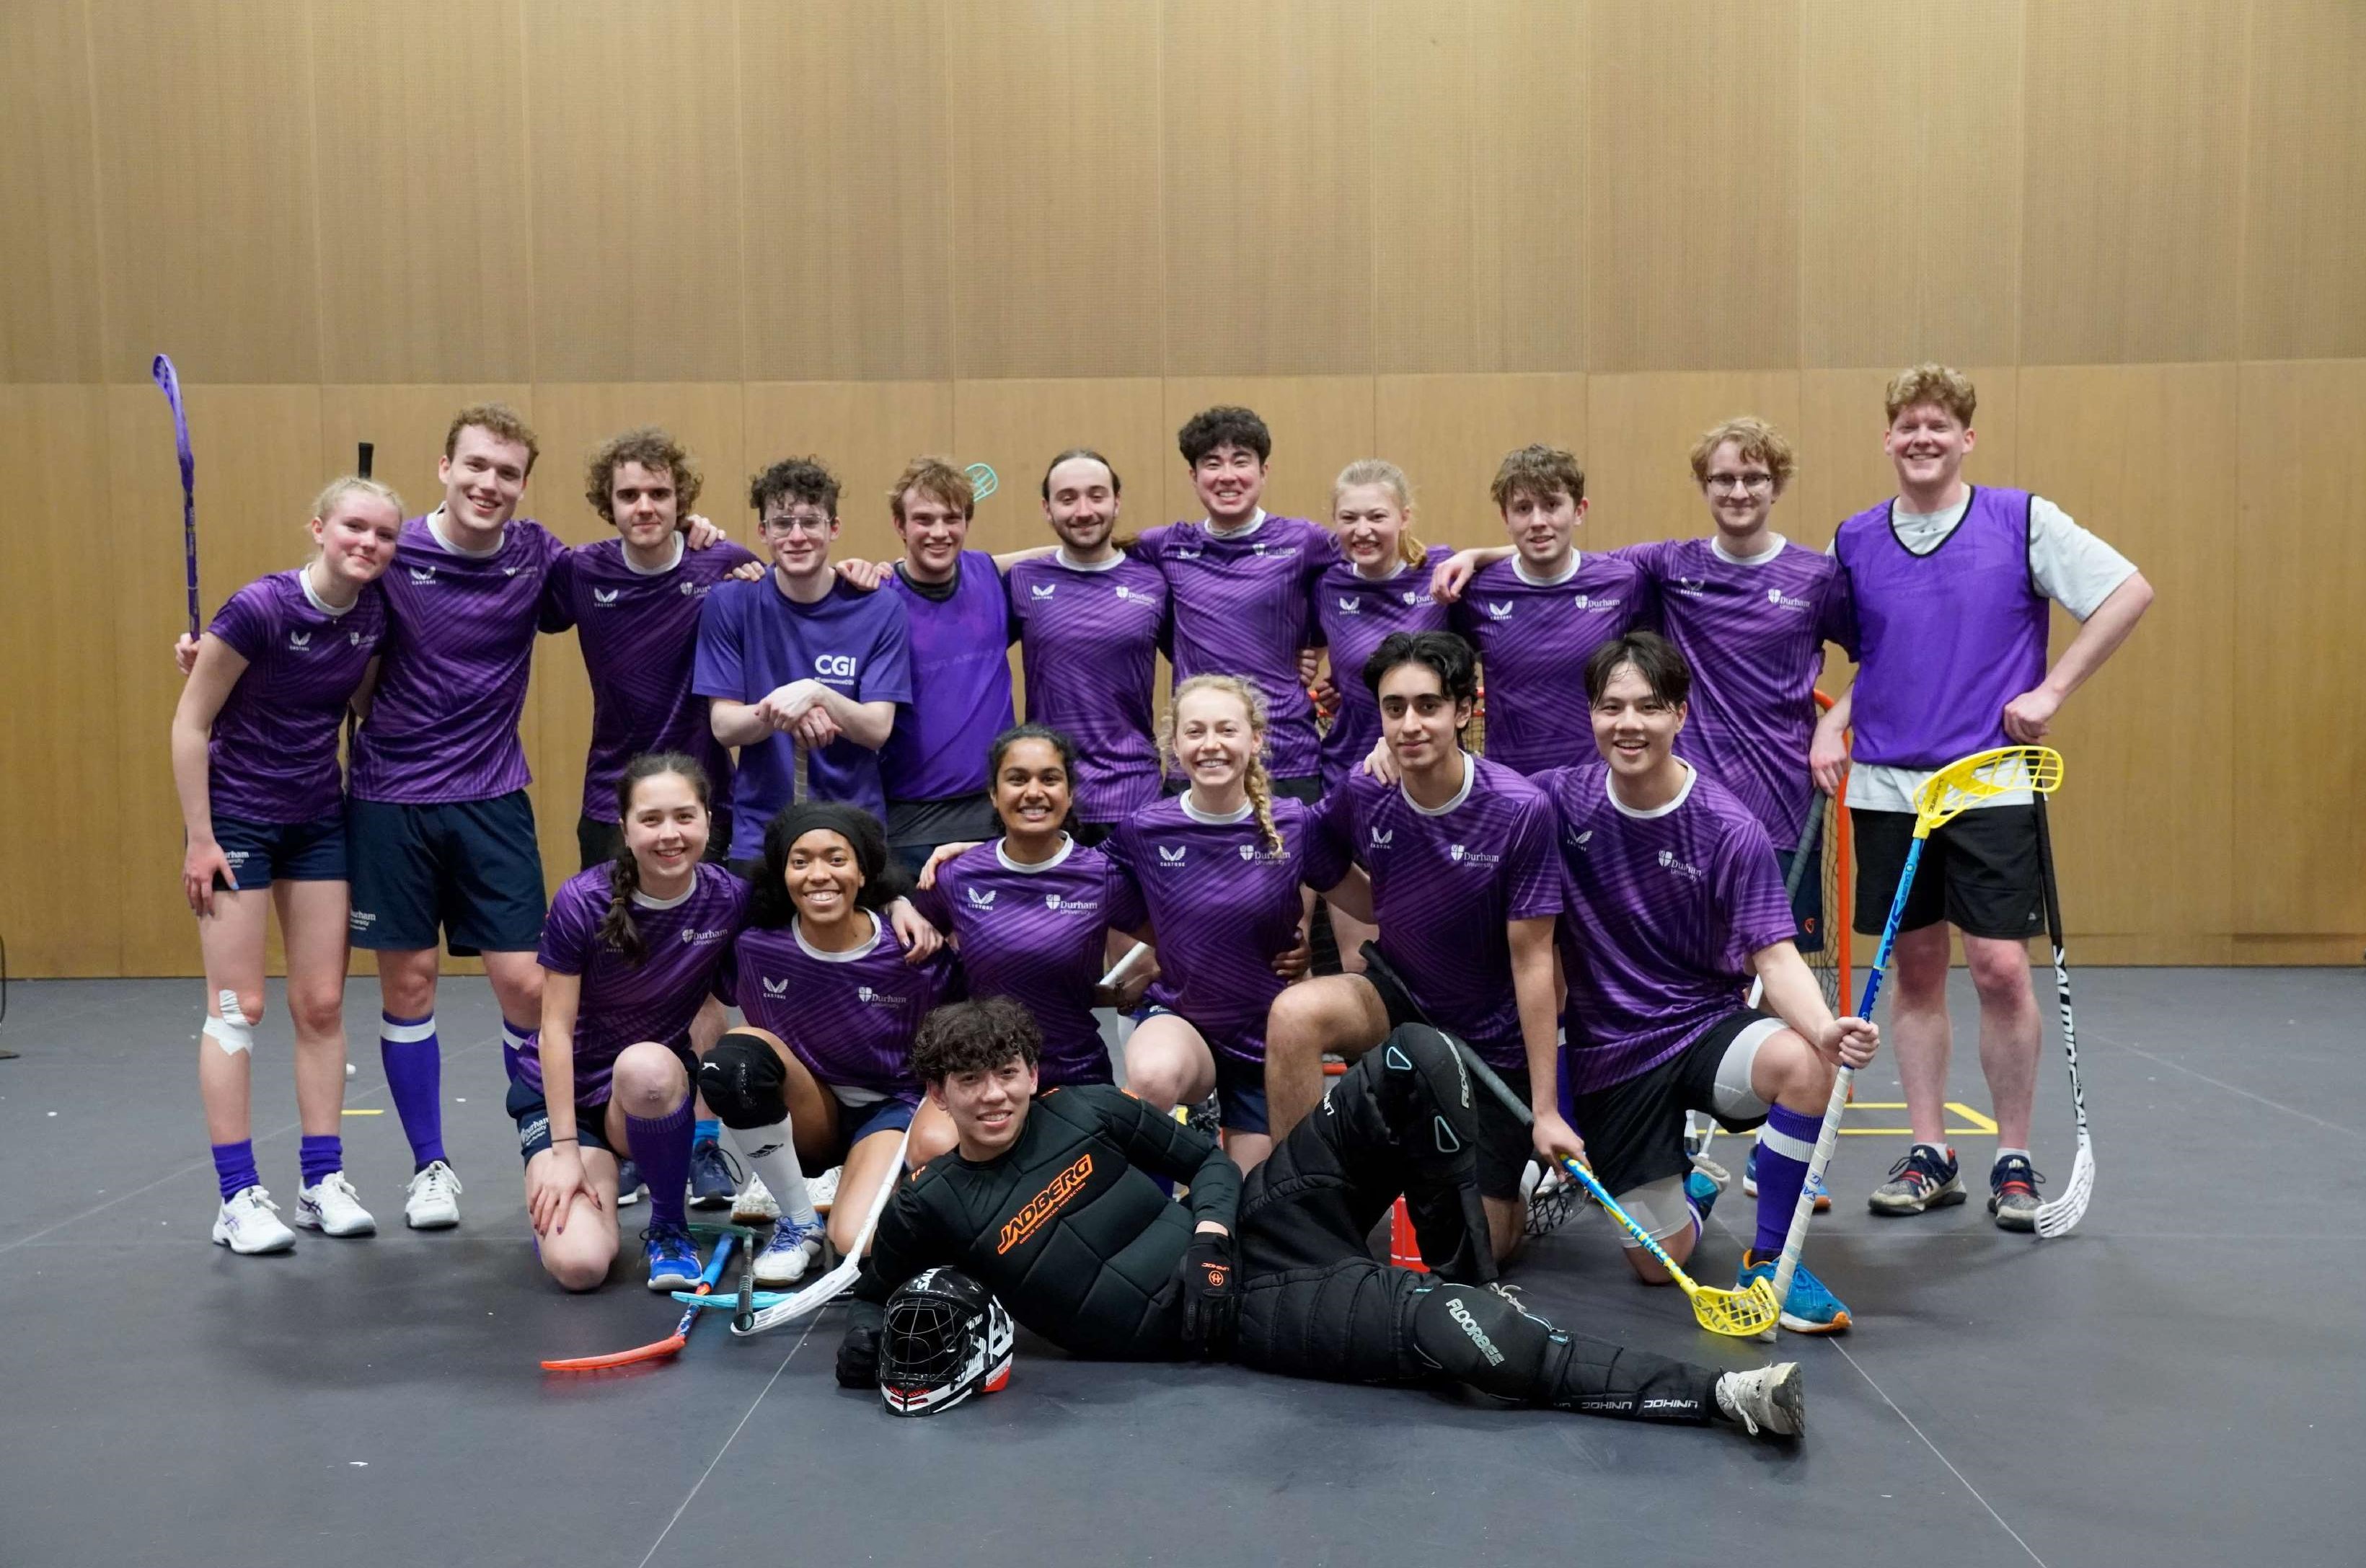 Floorball team picture after a fixture